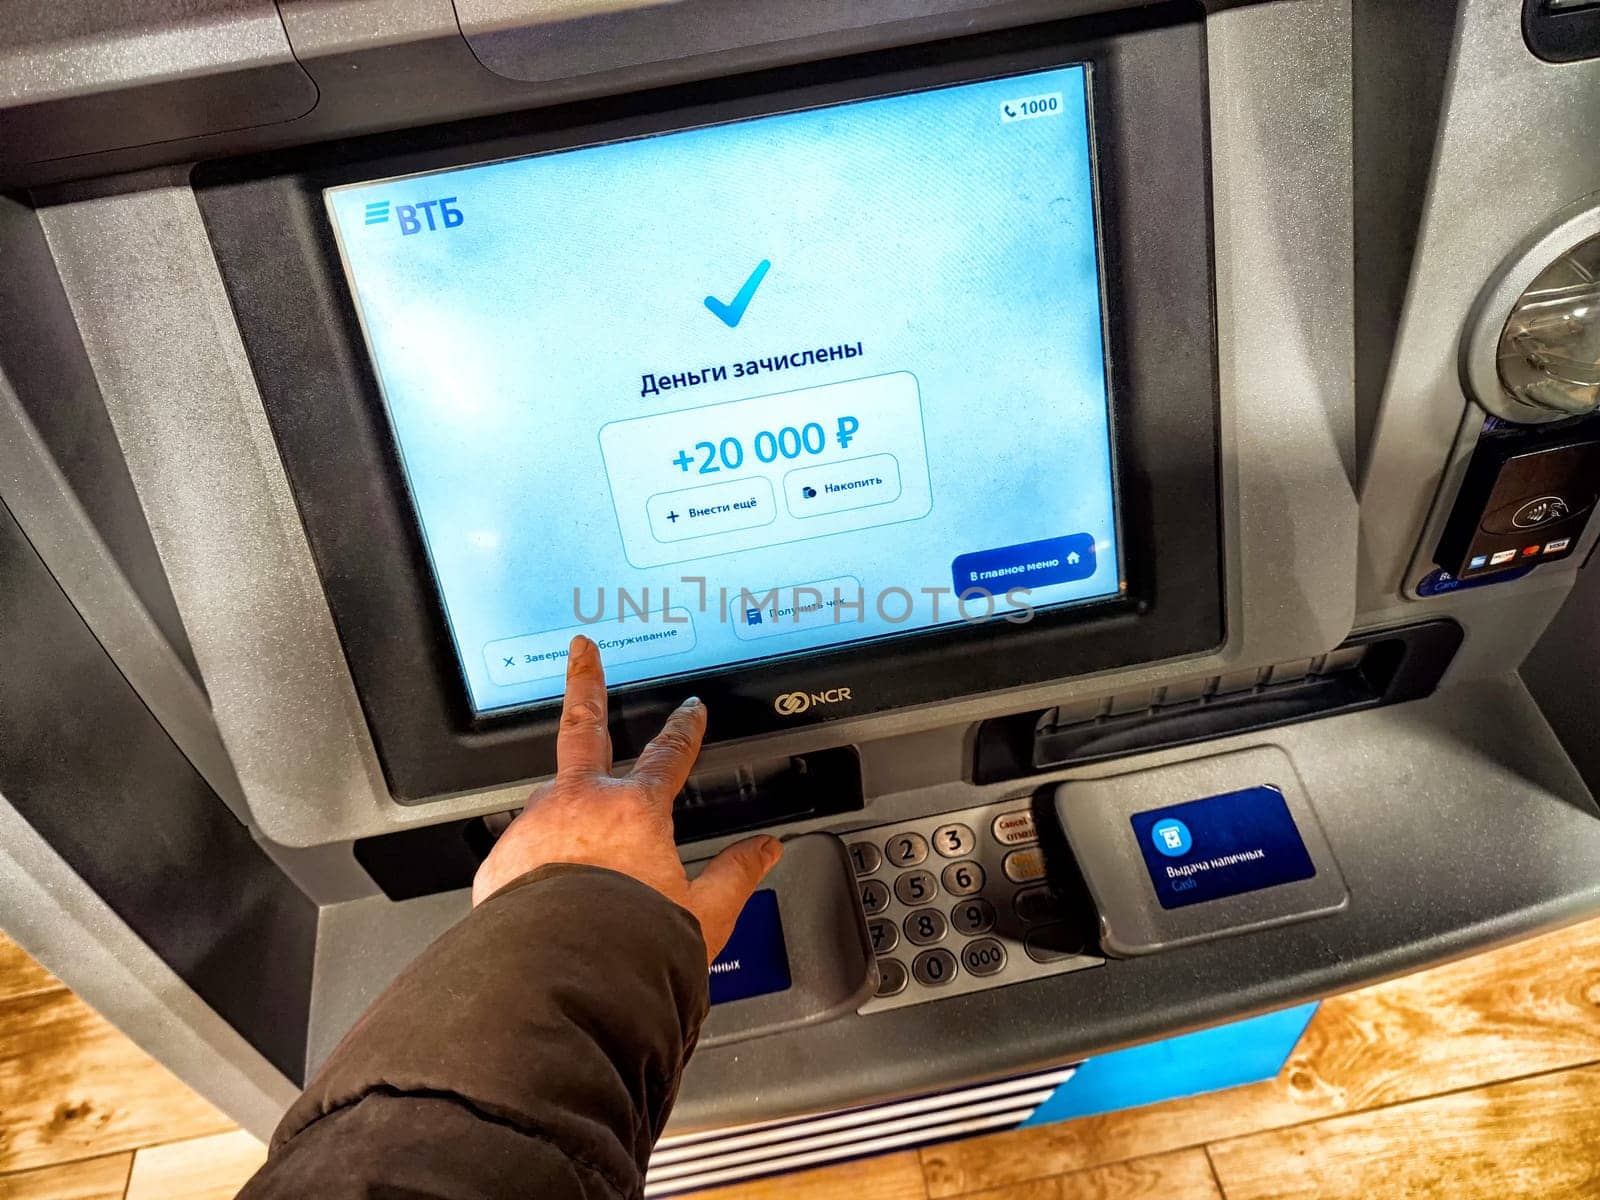 Kirov, Russia - April 28, 2024: Person Withdrawing Cash From ATM in Russia. Hand pressing button on an ATM with a Russian language screen